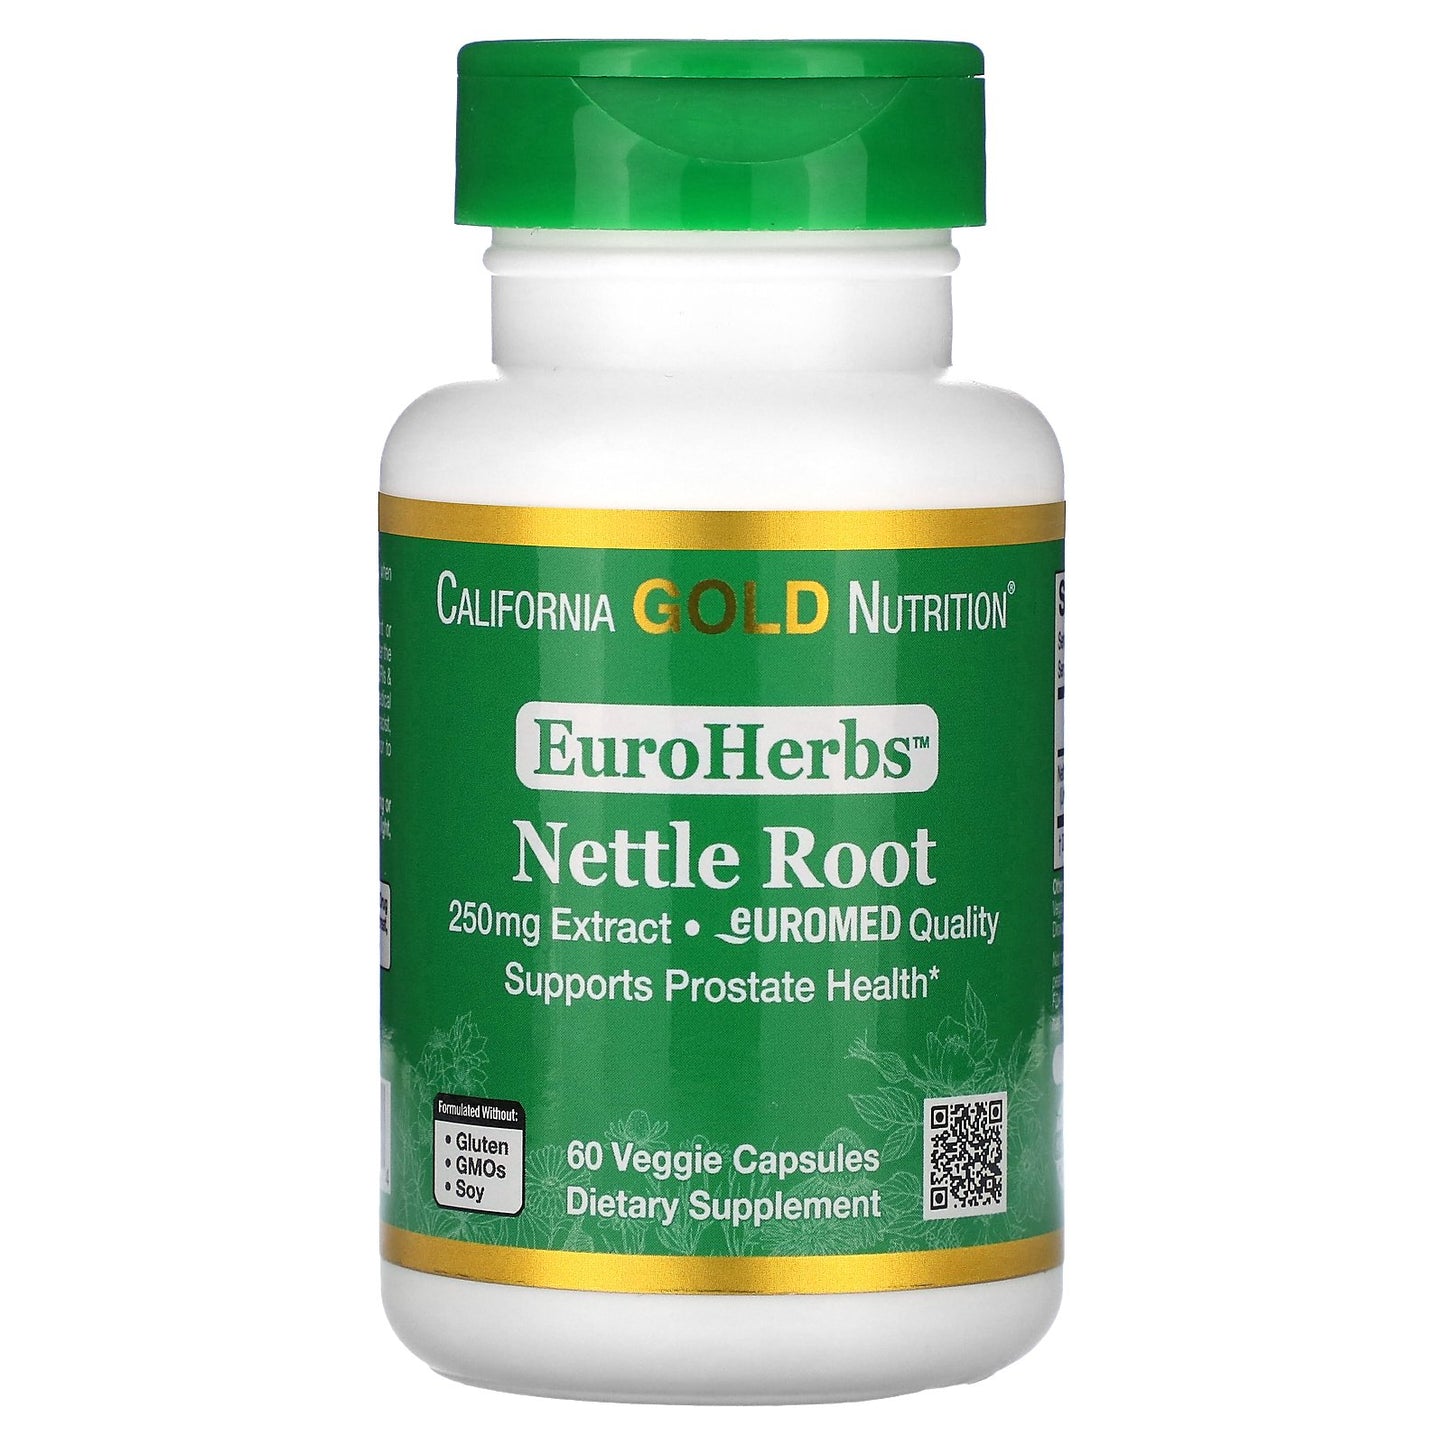 California Gold Nutrition, EuroHerbs, Nettle Root Extract, Euromed Quality, 250 mg, 60 Veggie Capsules